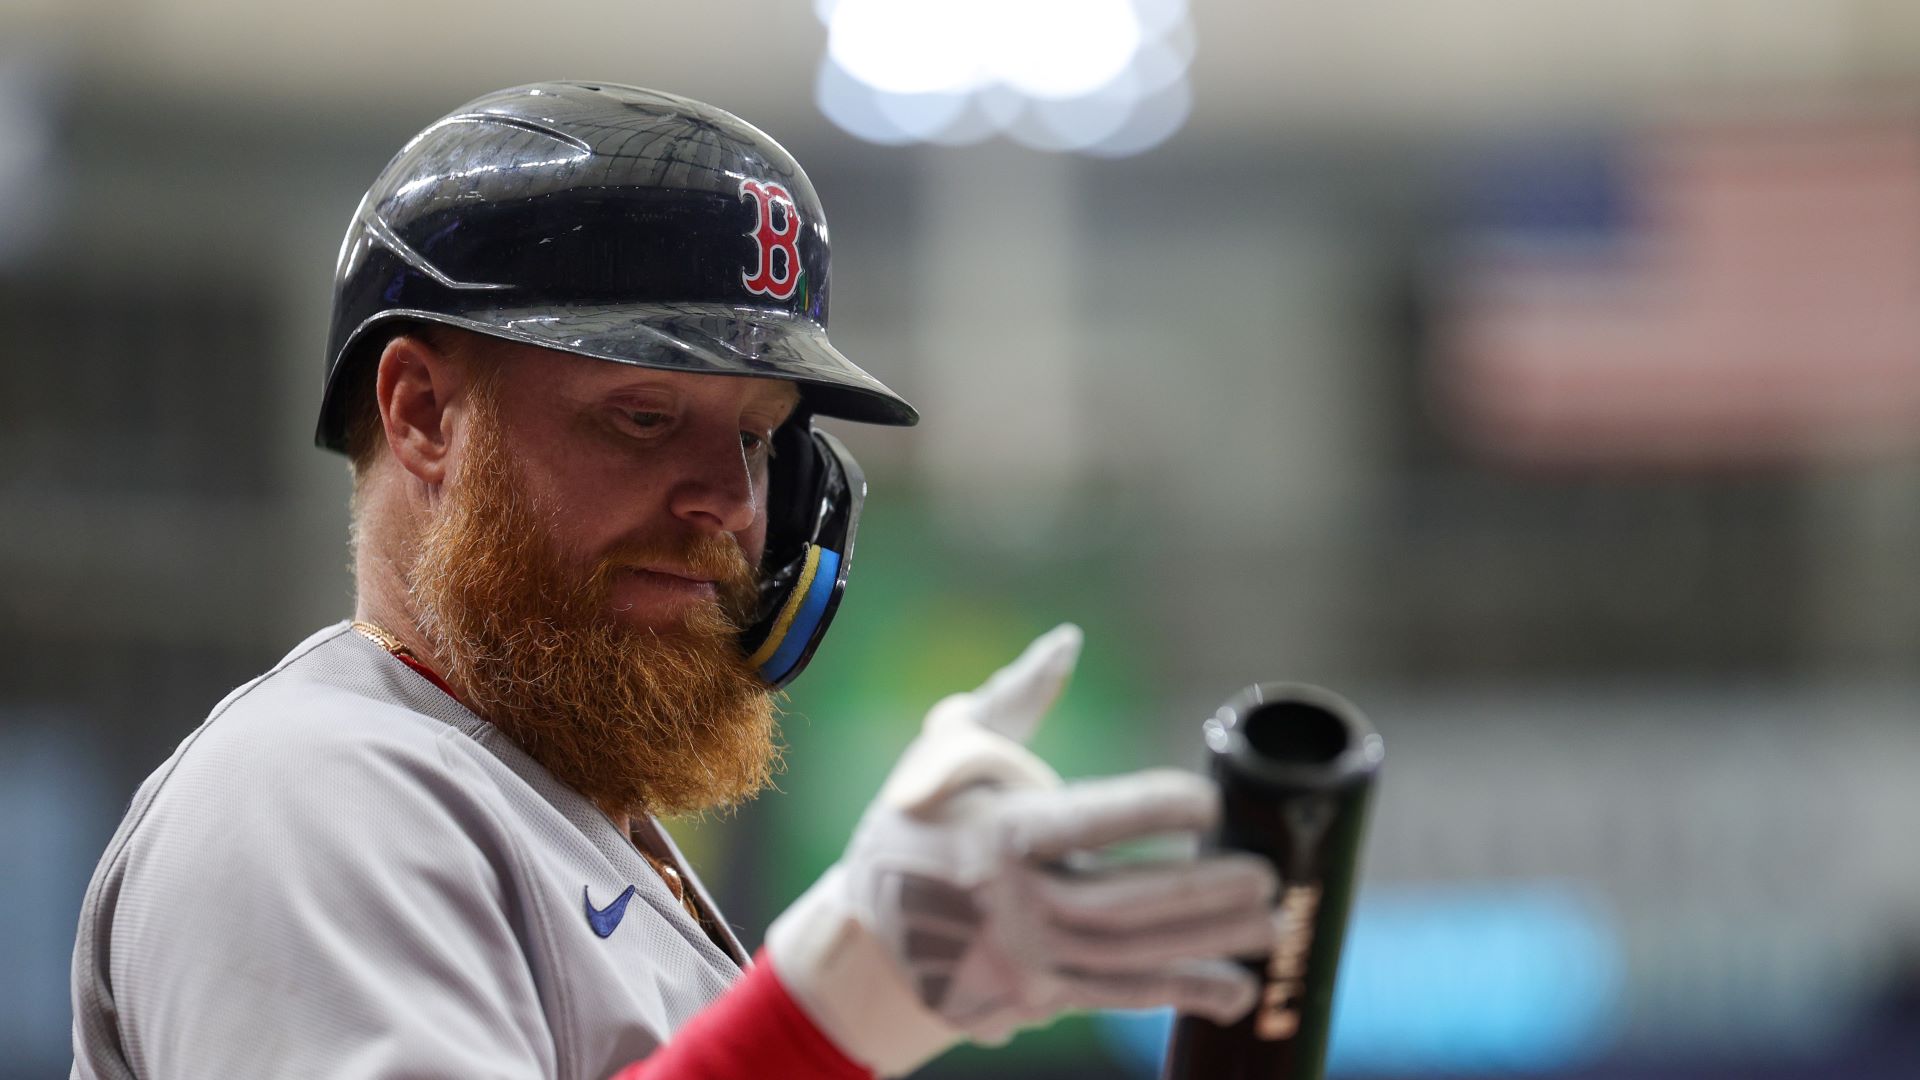 Justin Turner, Trevor Story Weigh In On Red Sox Parting With Chaim